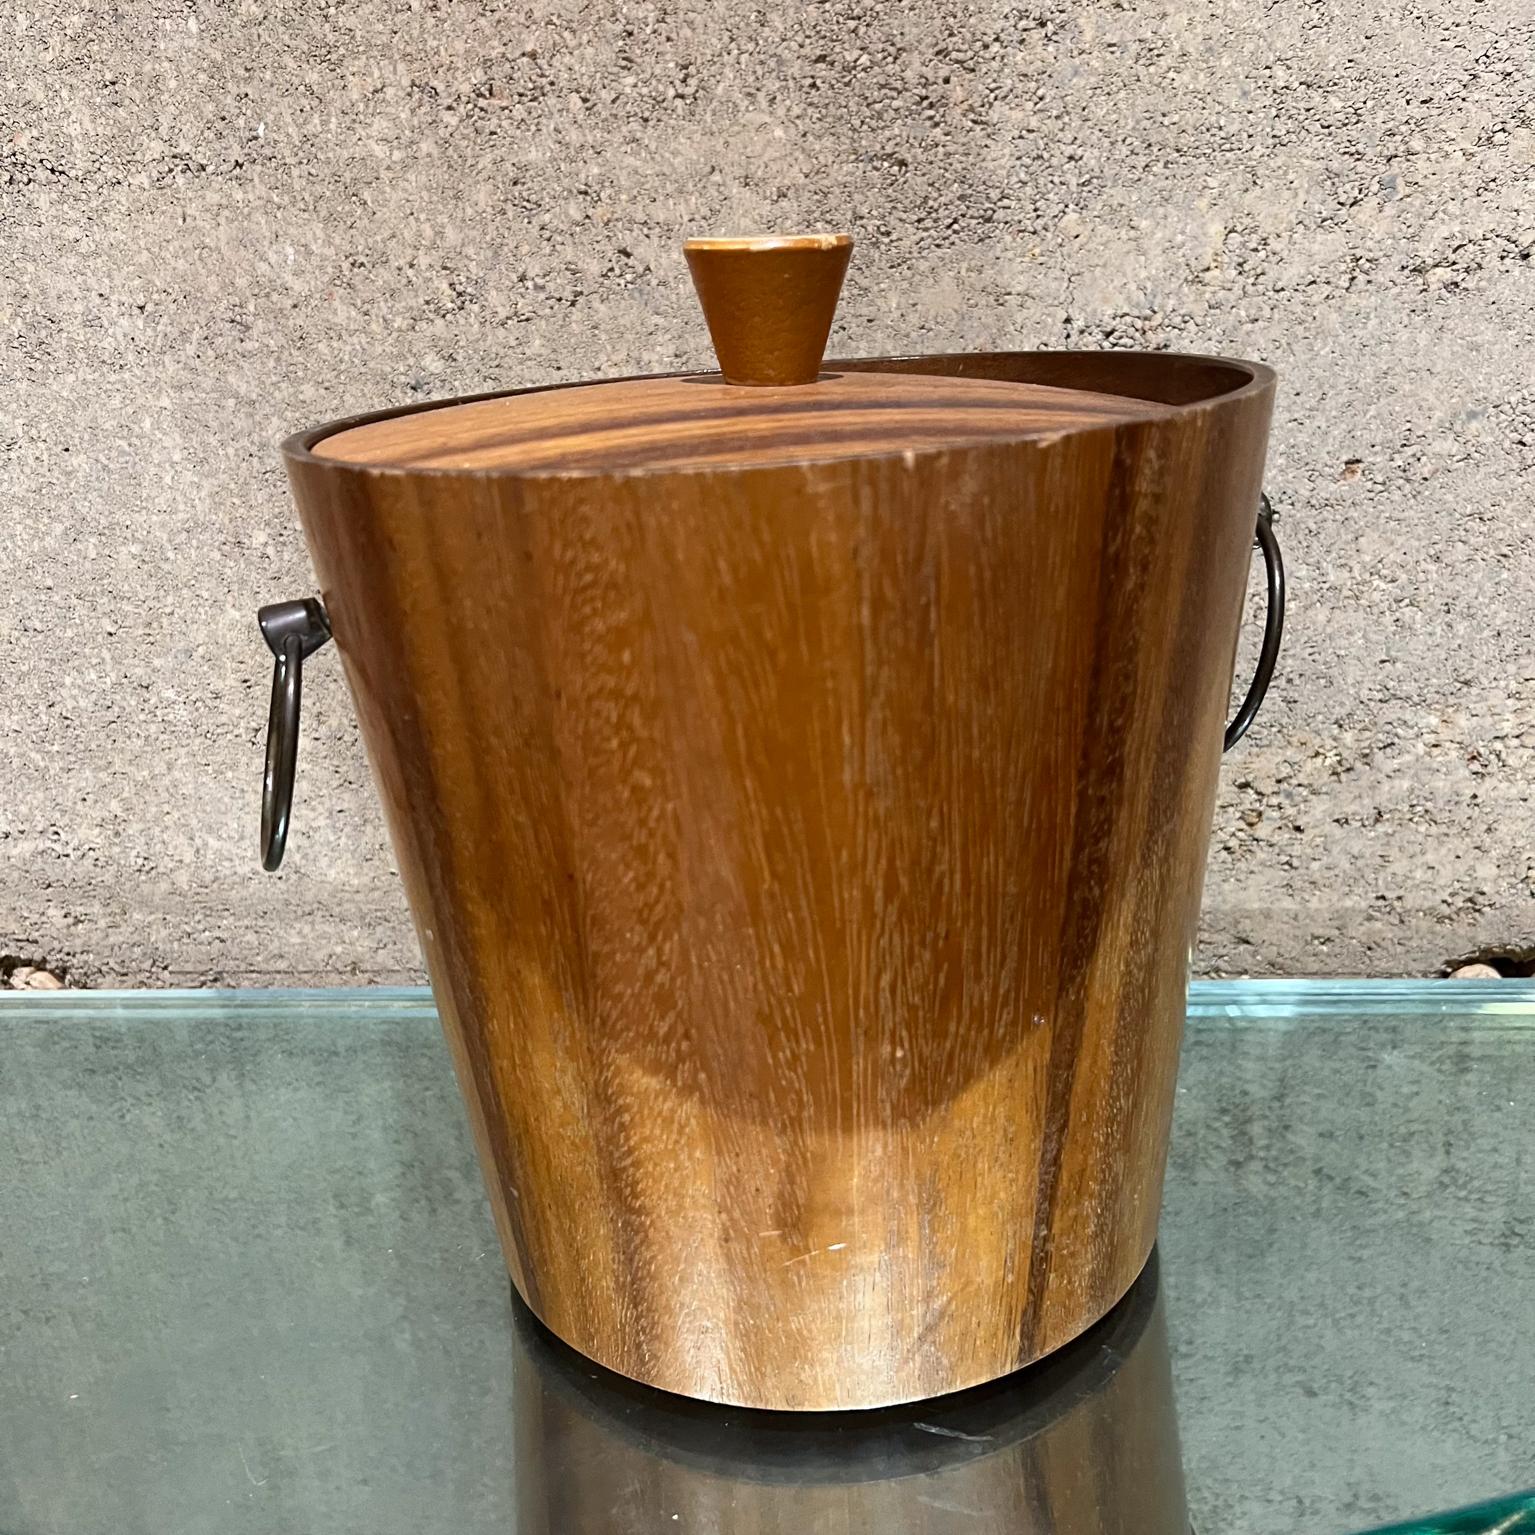 1960s KMC Barware vintage ice bucket teak wood Sensational Japanese Vintage modern ice bucket   
Original vintage unrestored condition. 
Stamped underneath KMC 
9.5 h x 8 diameter
Scratches are visible.
Refer to all images provided.



